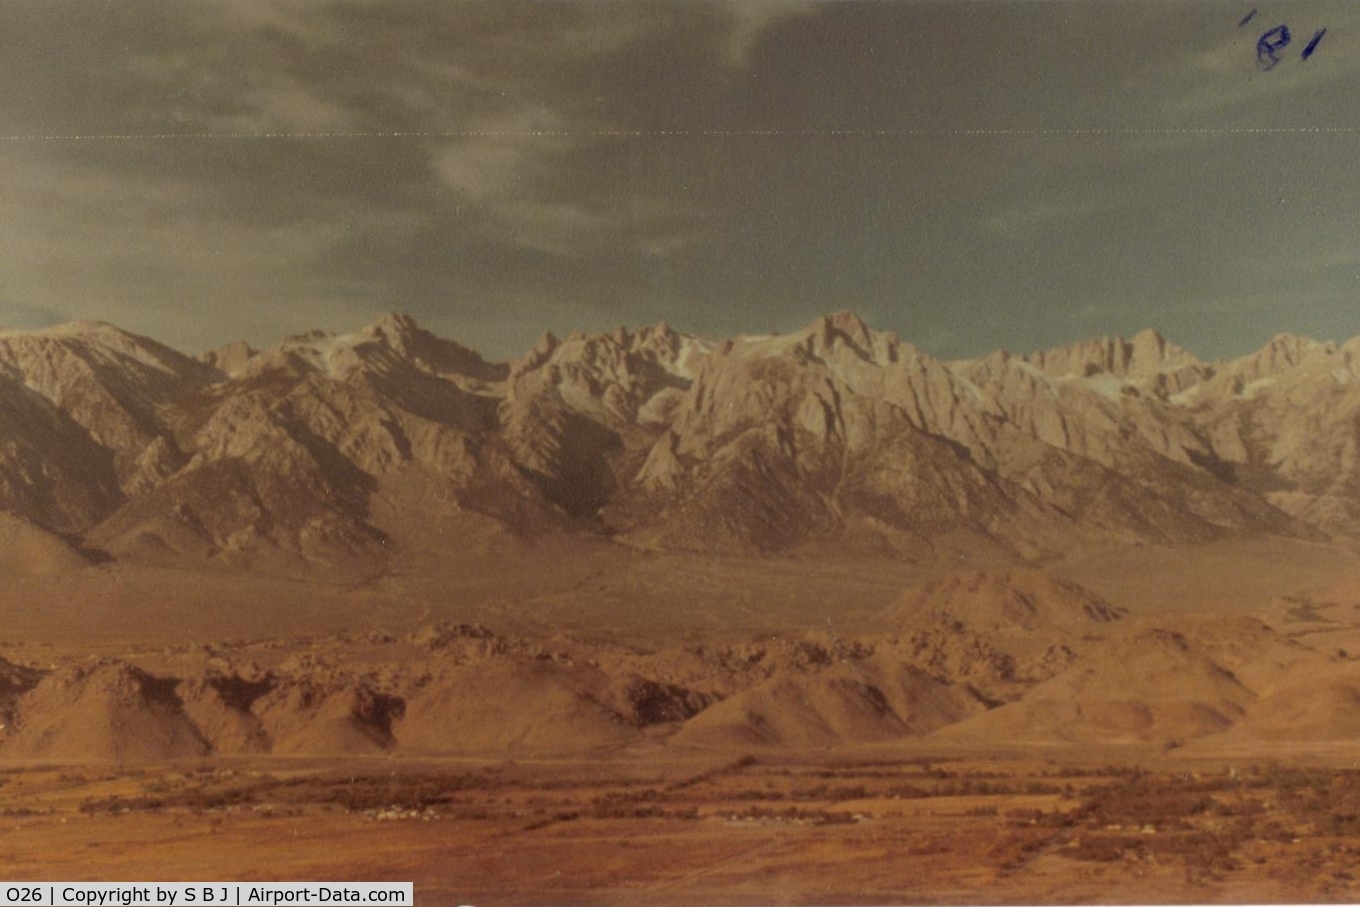 Lone Pine Airport (O26) - Lone Pine airport (bottom of pic) with the Alabama Hills (movie locations) and Mt Whitney at 14,491 feet in the distance.